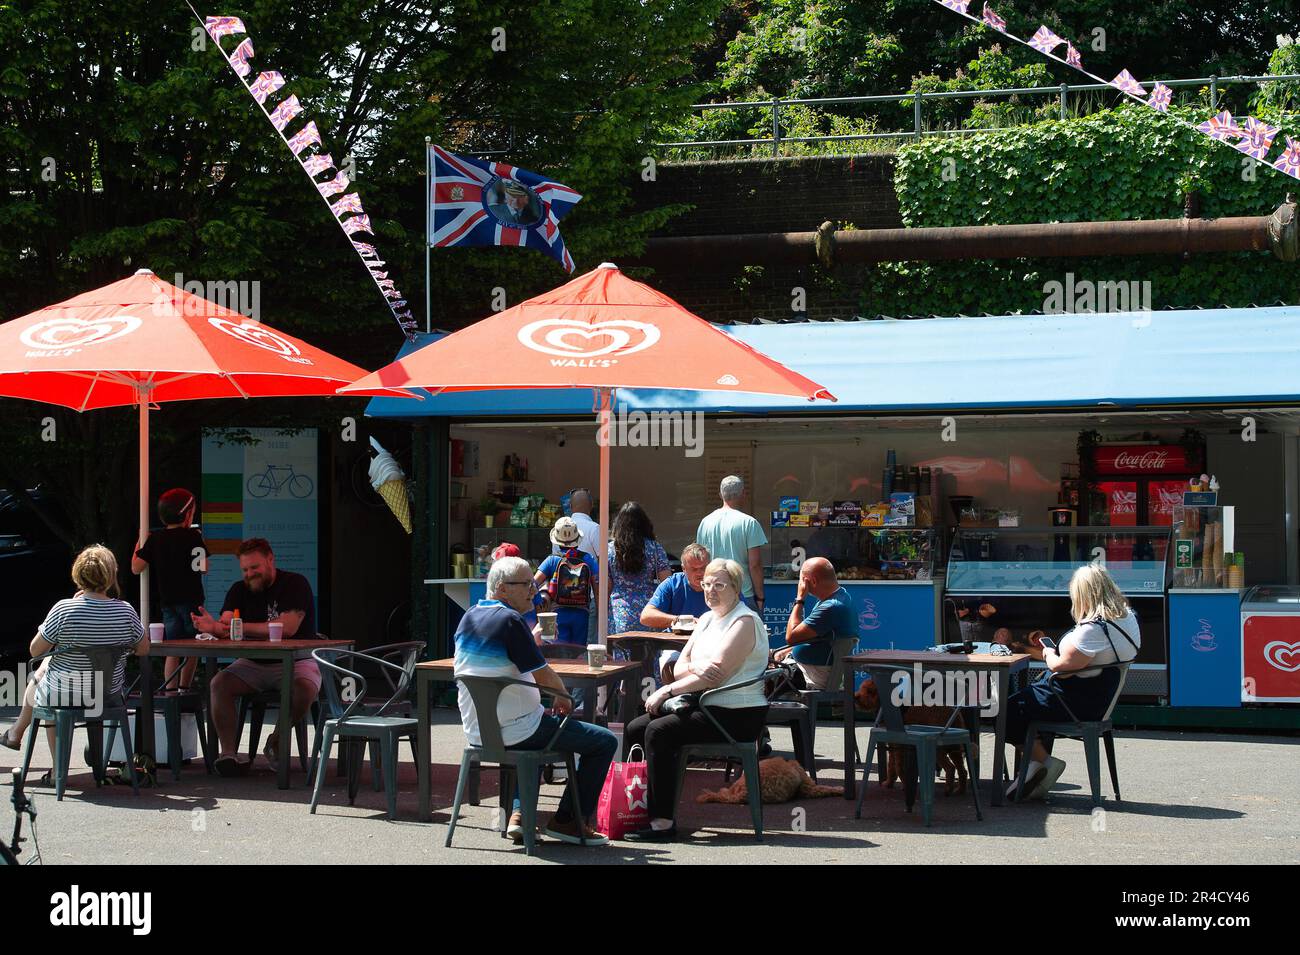 Windsor, Berkshire, UK. 27th May, 23. It was a beautiful warm and sunny day in Windsor Berkshire today as people flocked to the town. Credit: Maureen McLean/Alamy Live News Stock Photo